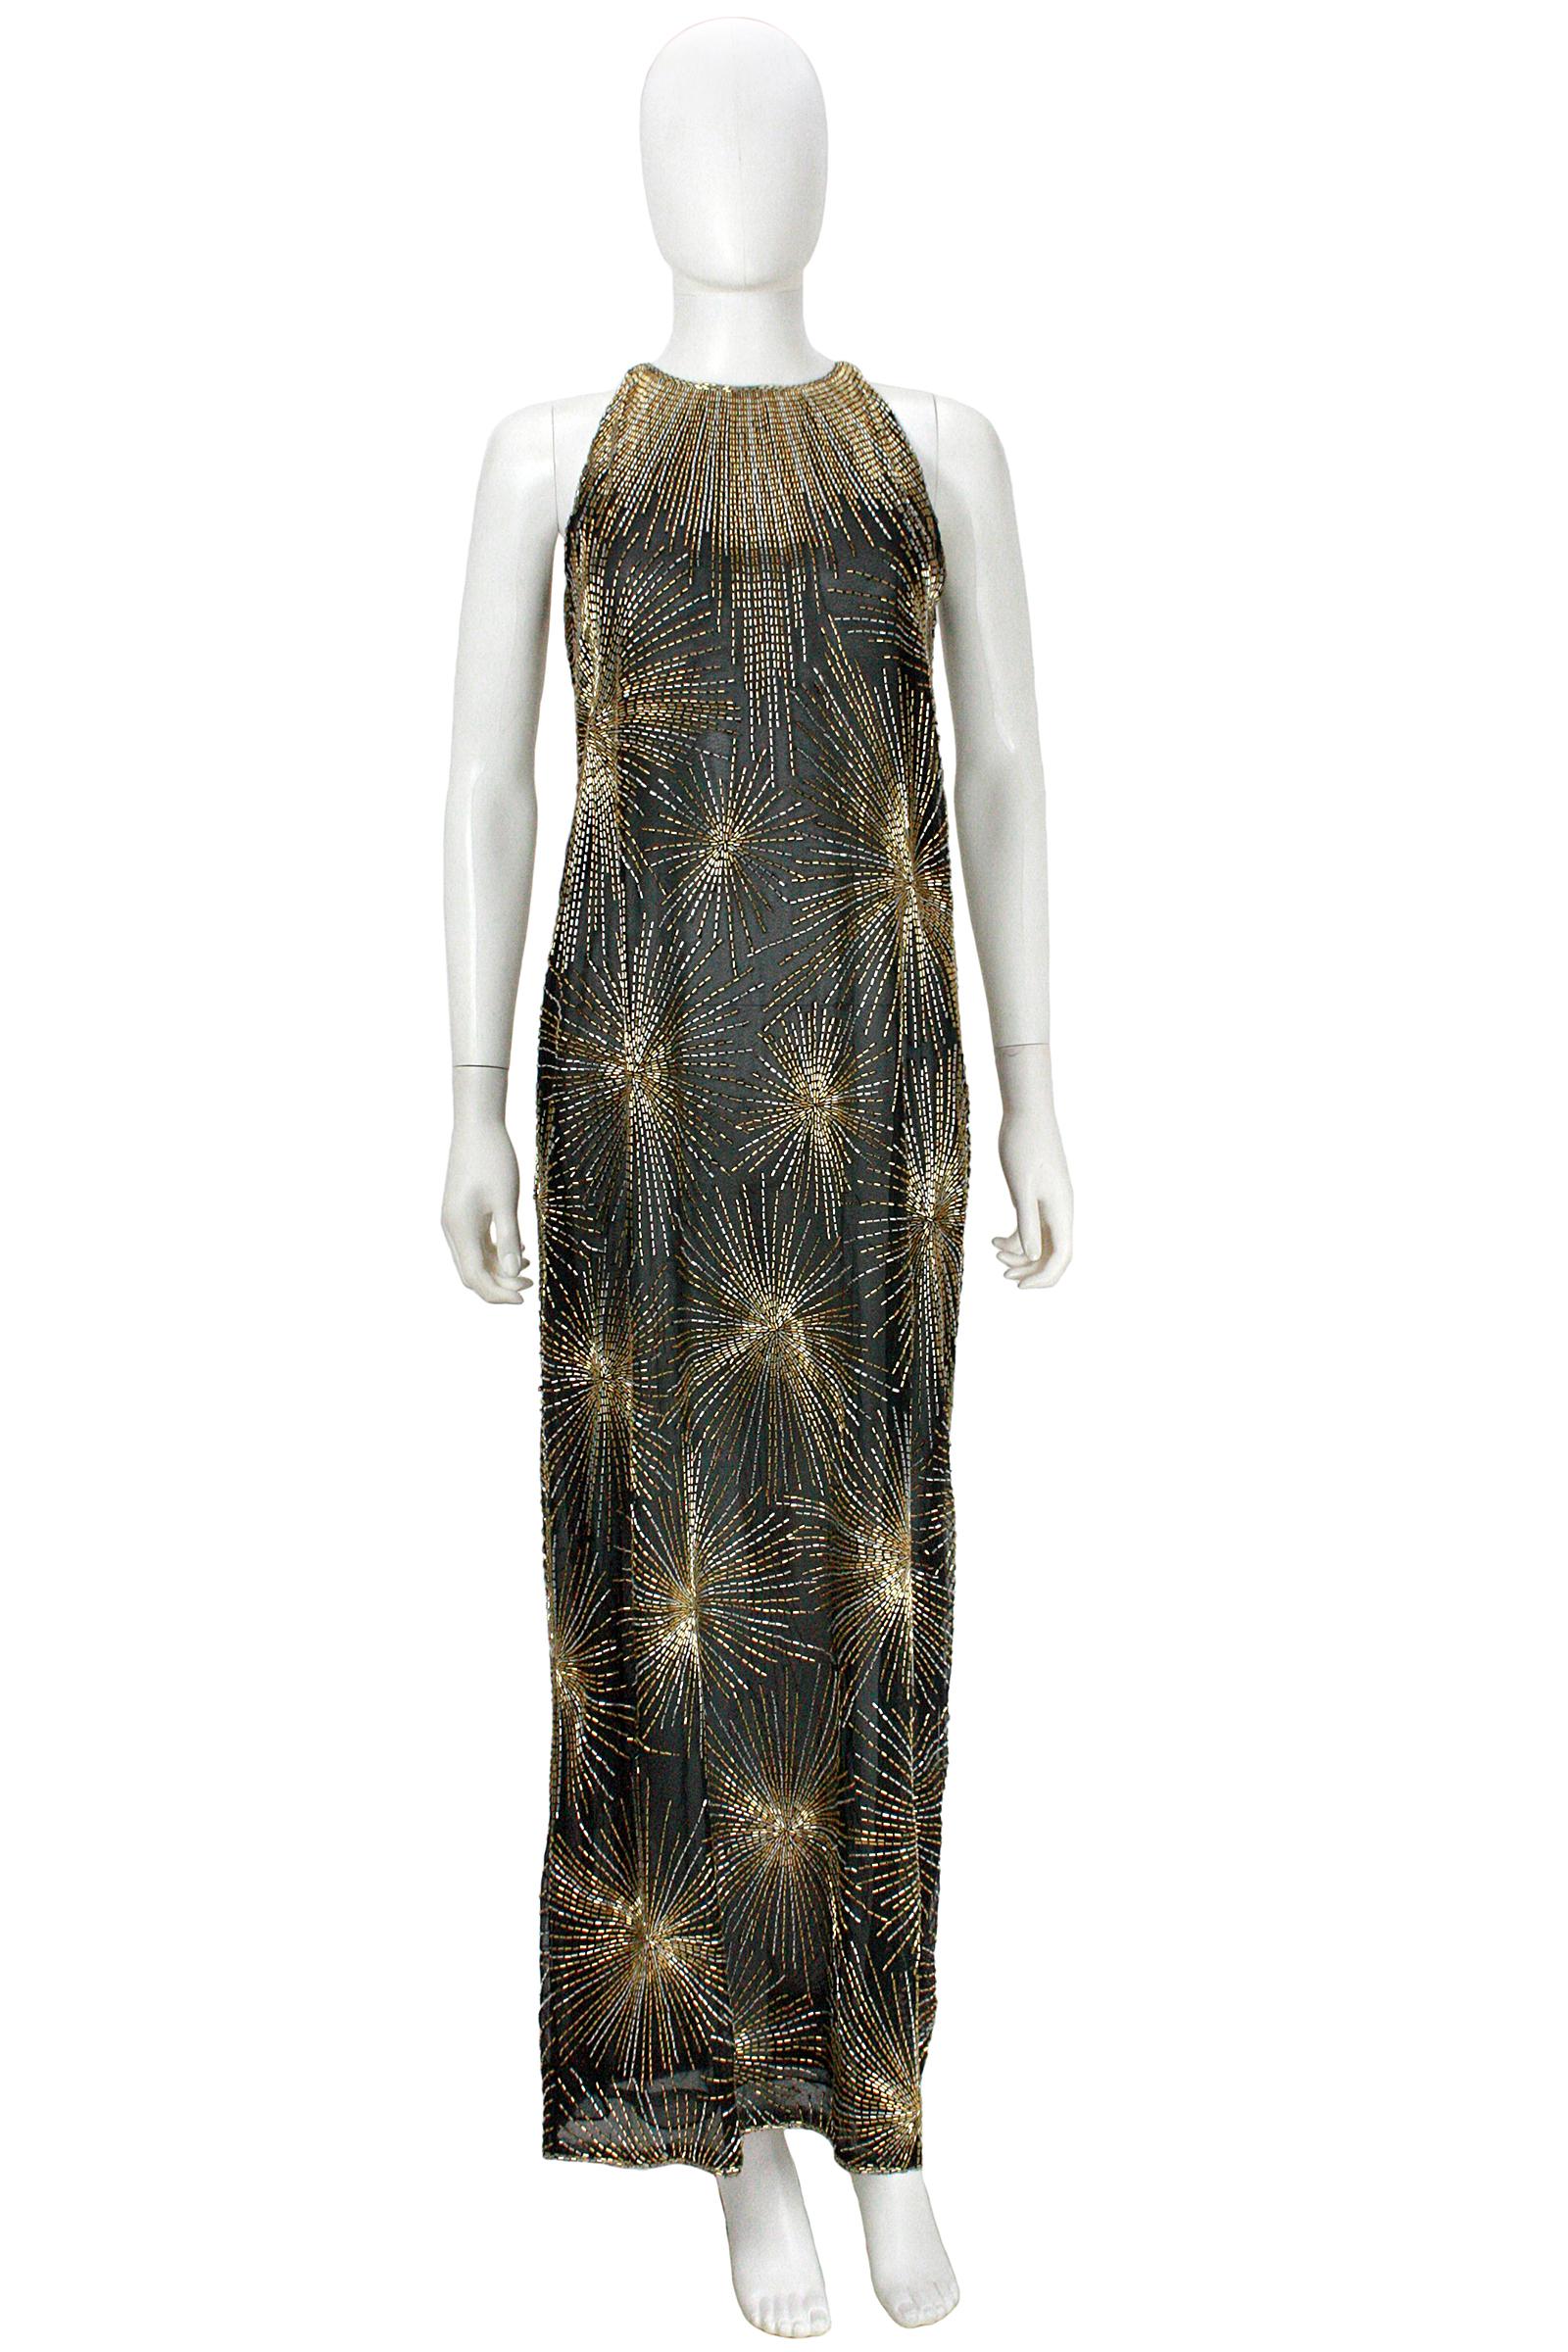 1970s Halston ICONIC 'FIREWORKS' beaded Black & Gold Gown with Jacket  1